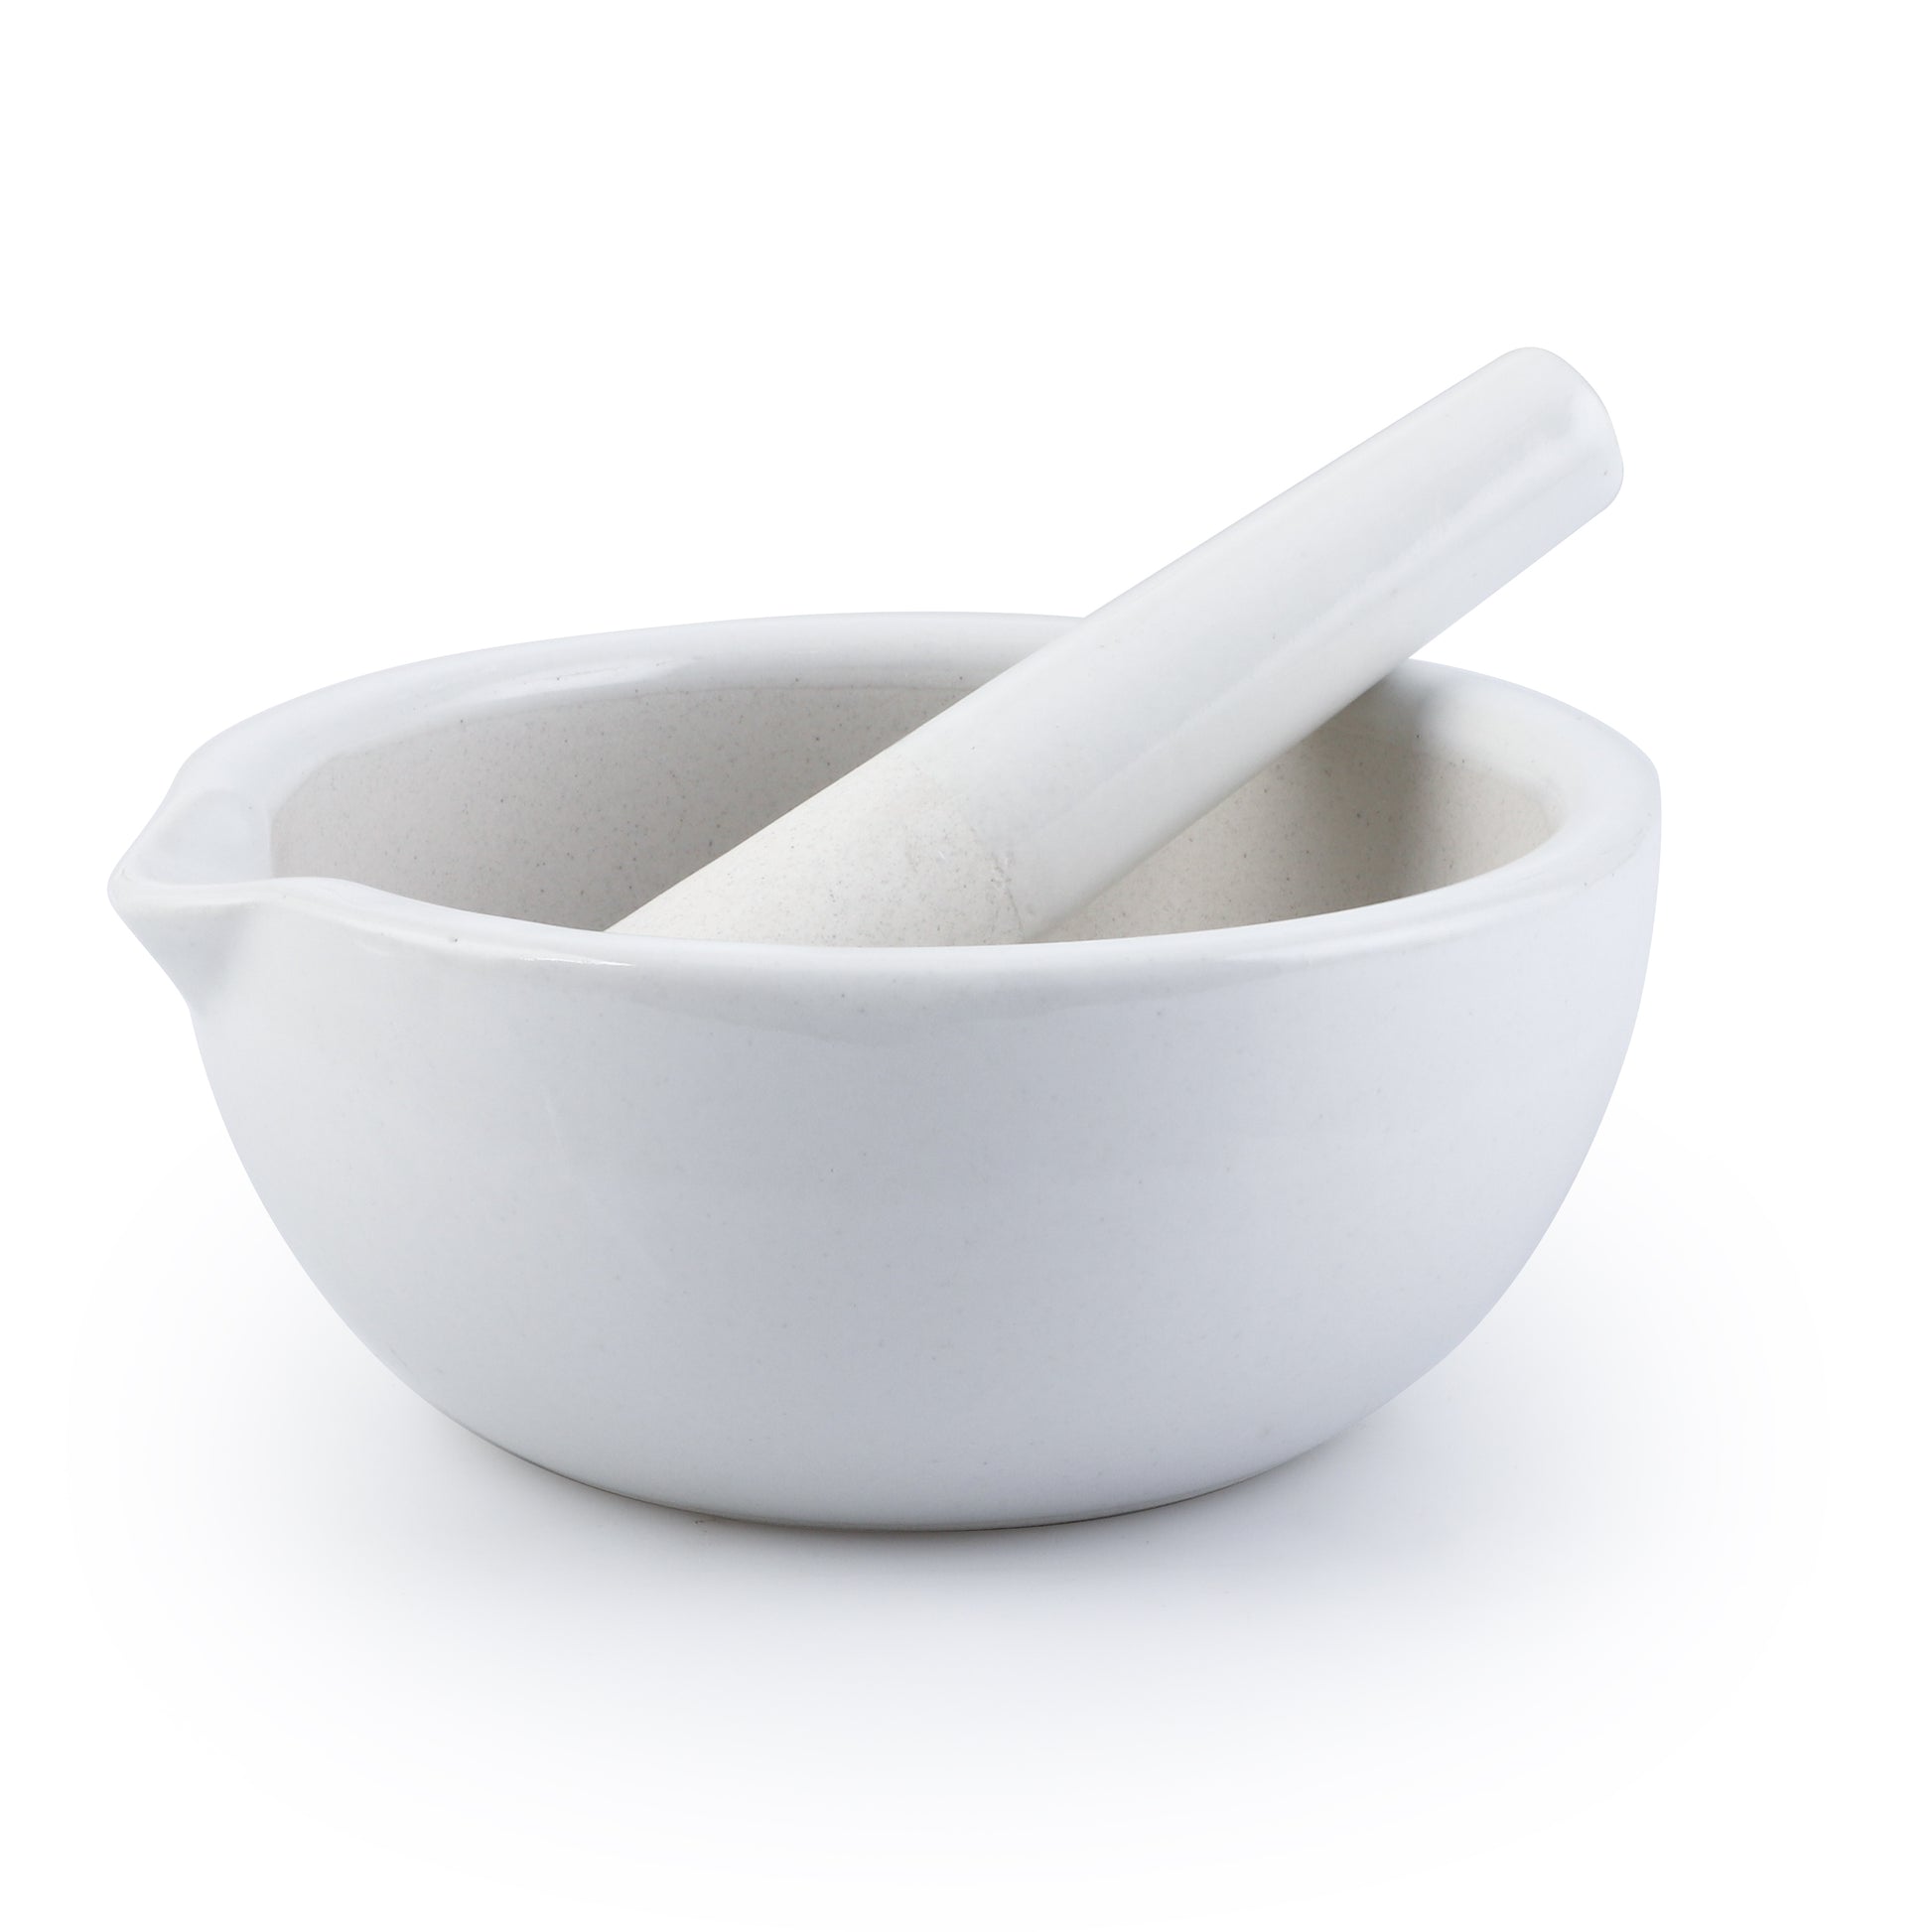 Porcelain Mortar & Pestle (Complete set of 3 sizes, FREE SHIPPING) 